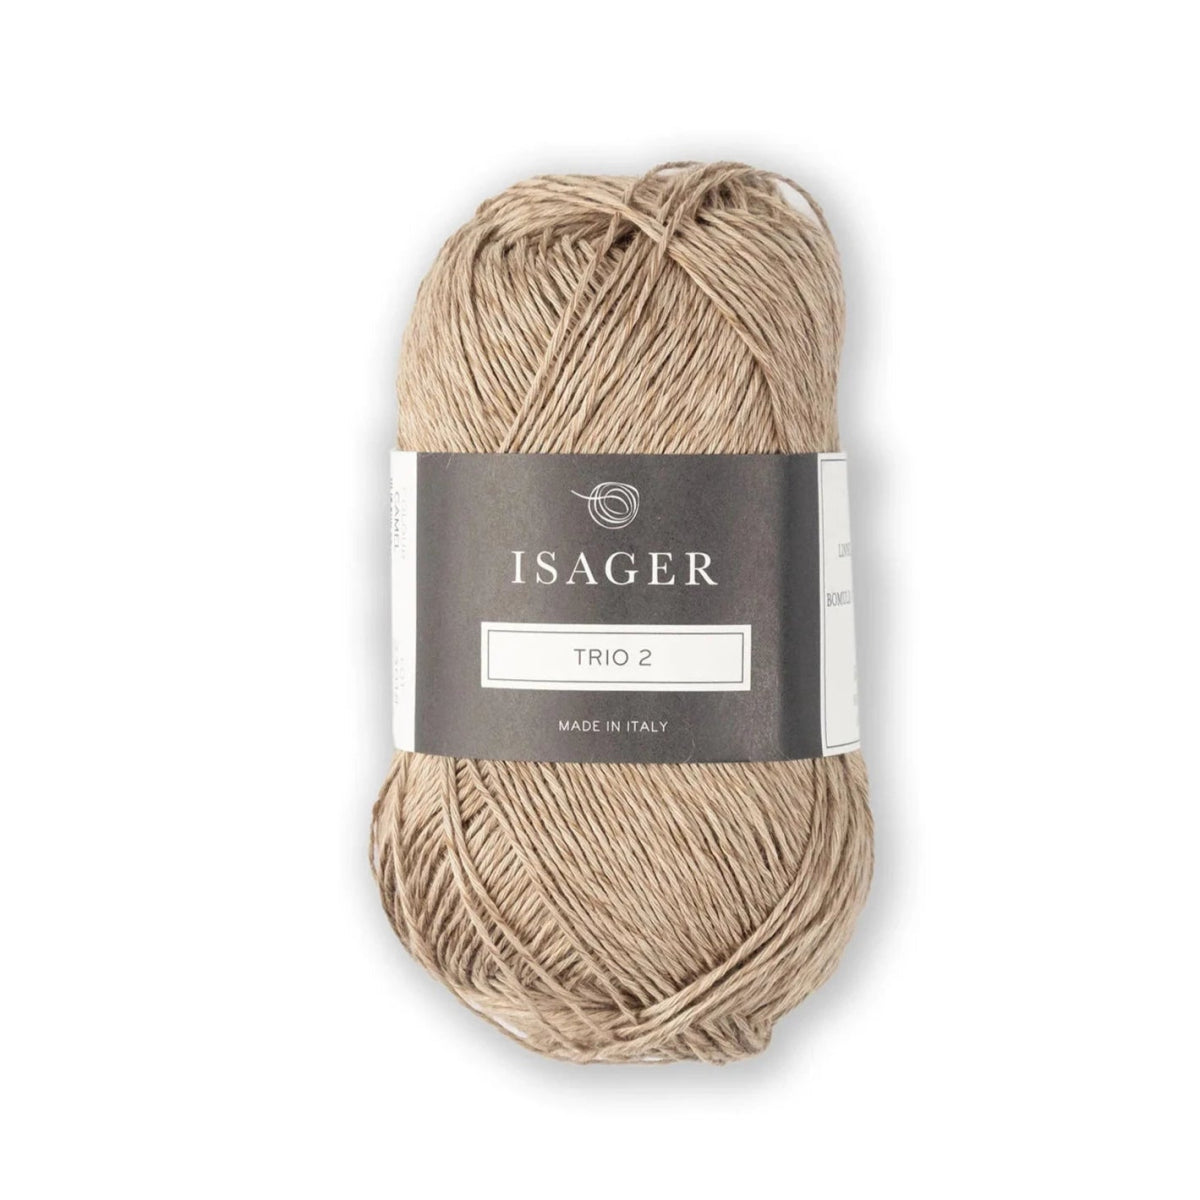 Isager Trio 2 - Camel - 5 Ply - Cotton - The Little Yarn Store